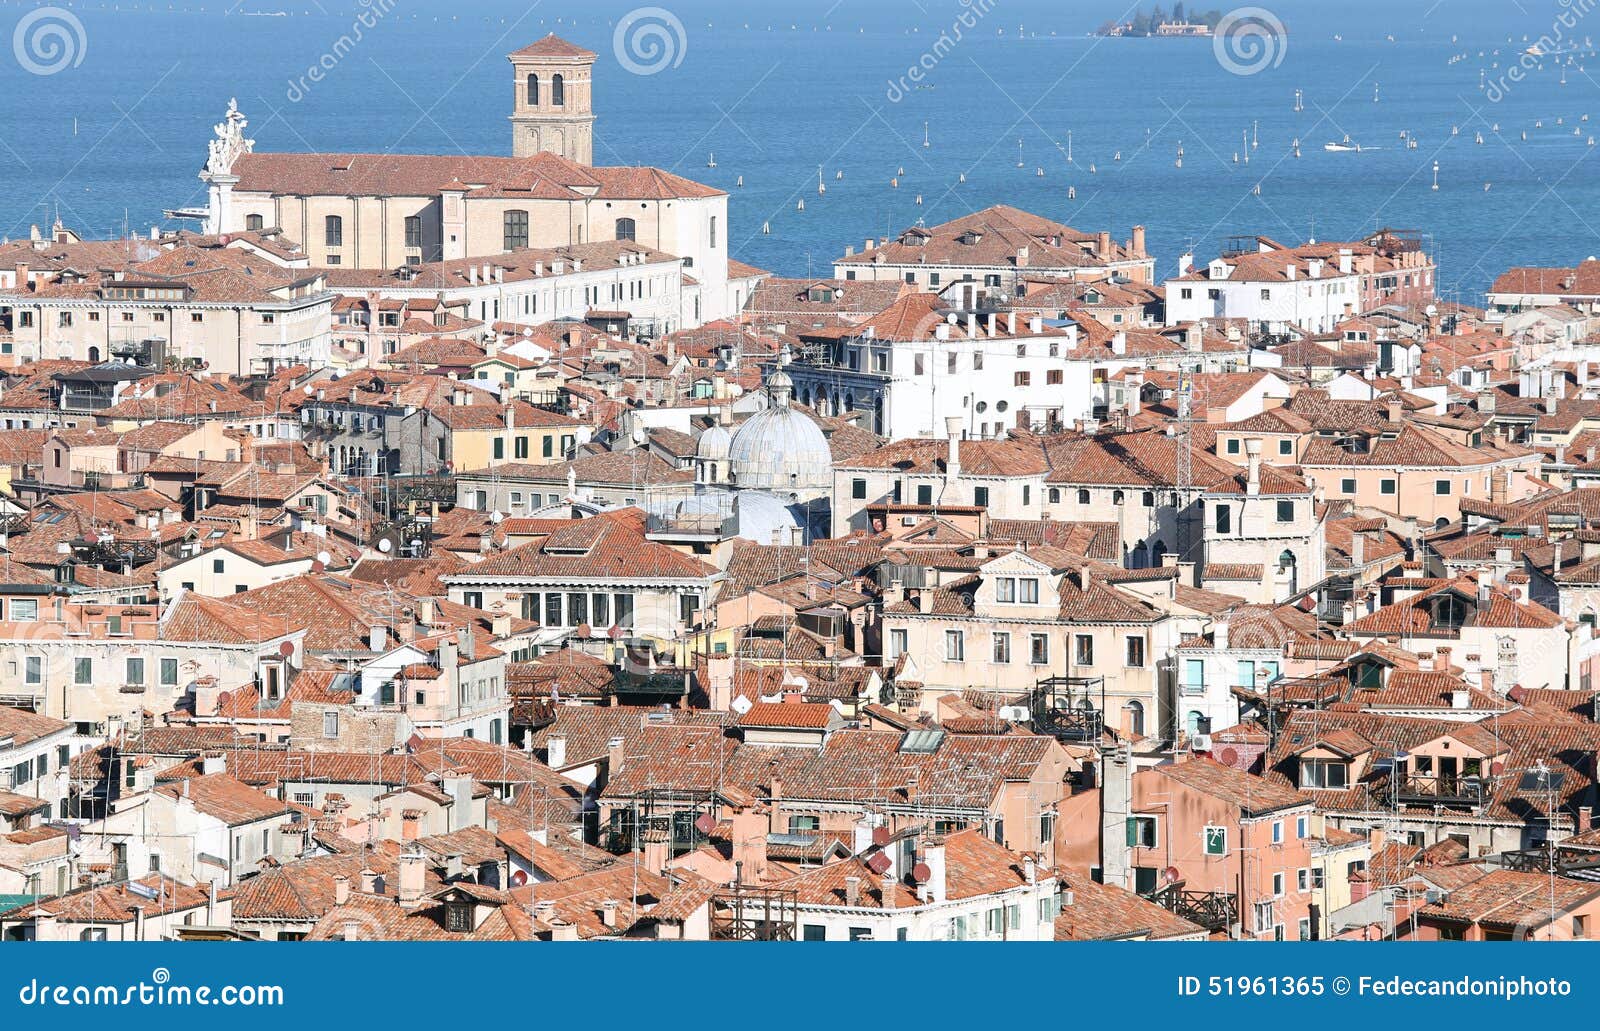 venice, italy, red-tiled roofs of the houses and the church